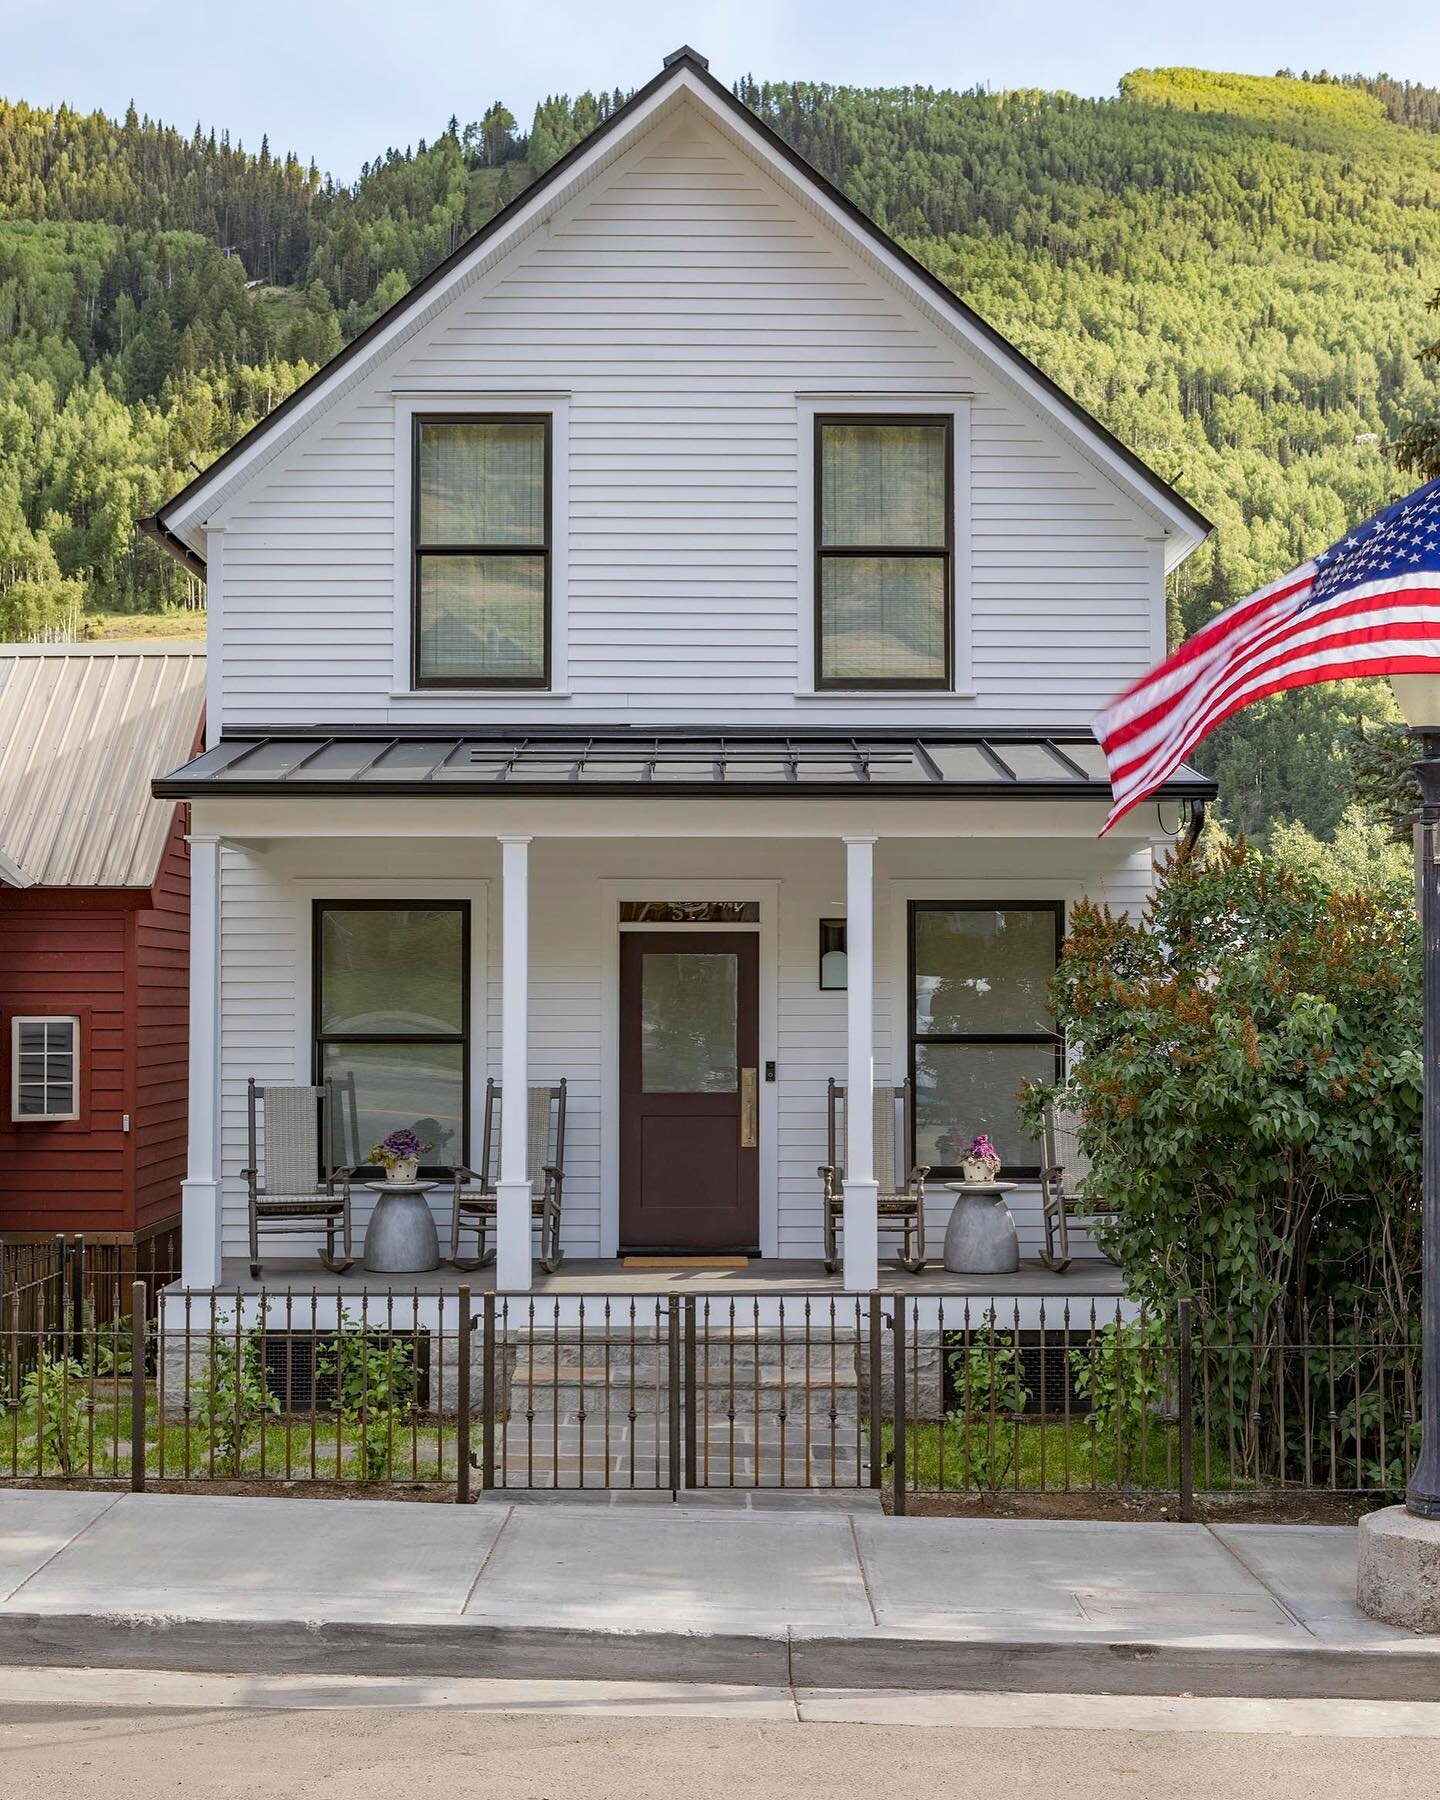 Happy Presidents Day! Who else wishes they were kicking off their week in #Telluride? 🏞

This stunning second home dates back to 1893. We loved teaming up with a local builder on this project, mixing traditional elements with a modern mountain aesth